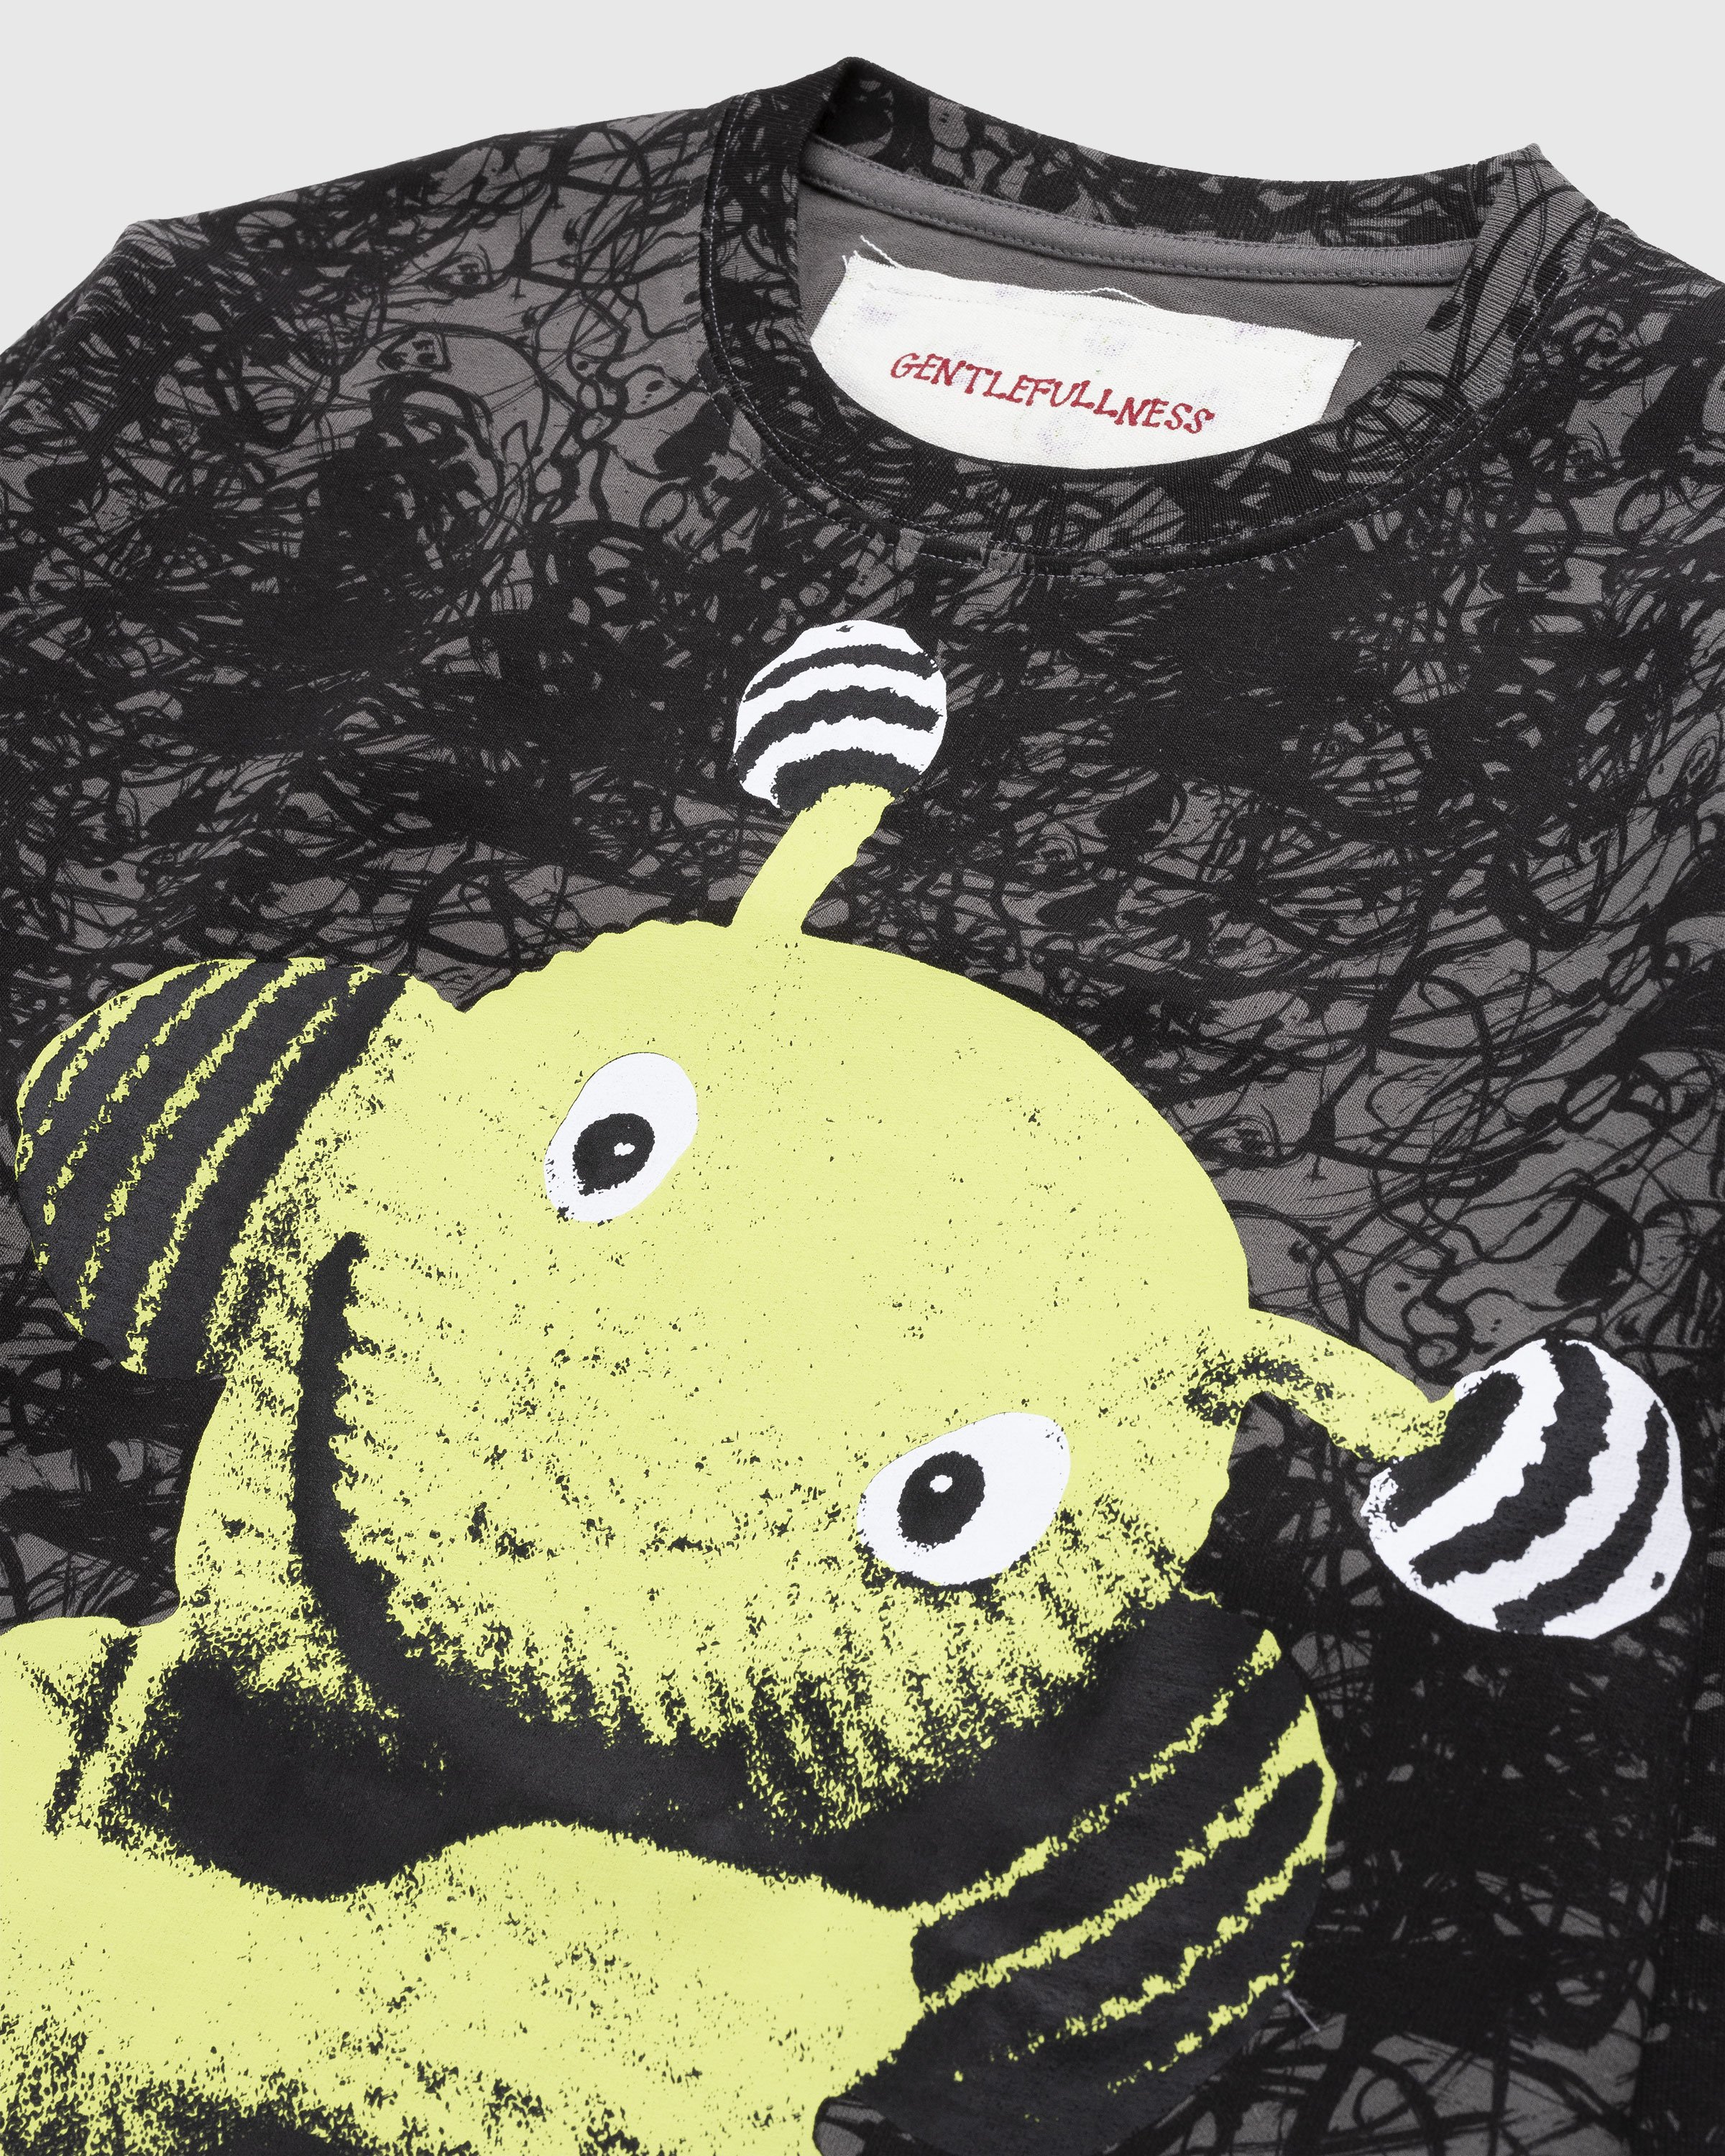 Gentle Fullness - Recycled Cotton Alien Puppet Longsleeve Tee Washed Black - Clothing - Multi - Image 5